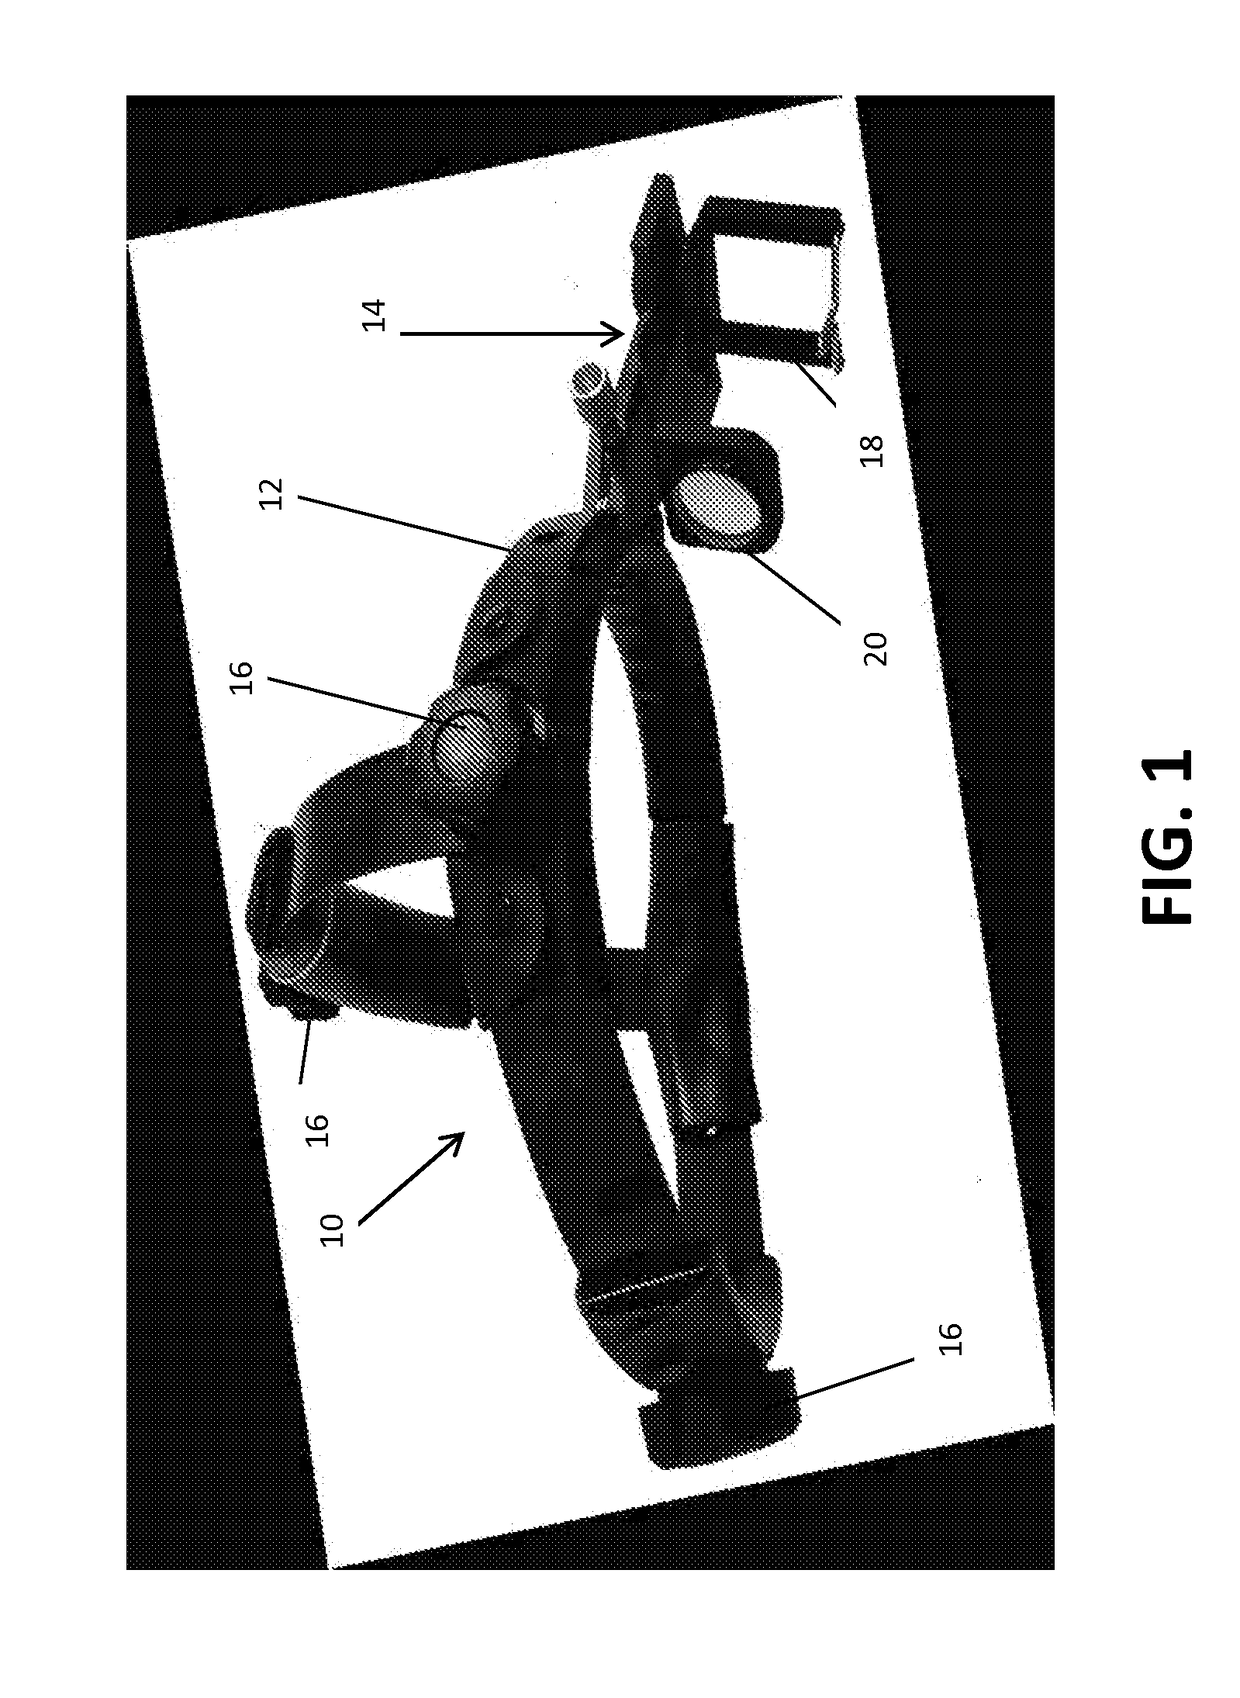 Head-mounted indirect opthalmoscope camera